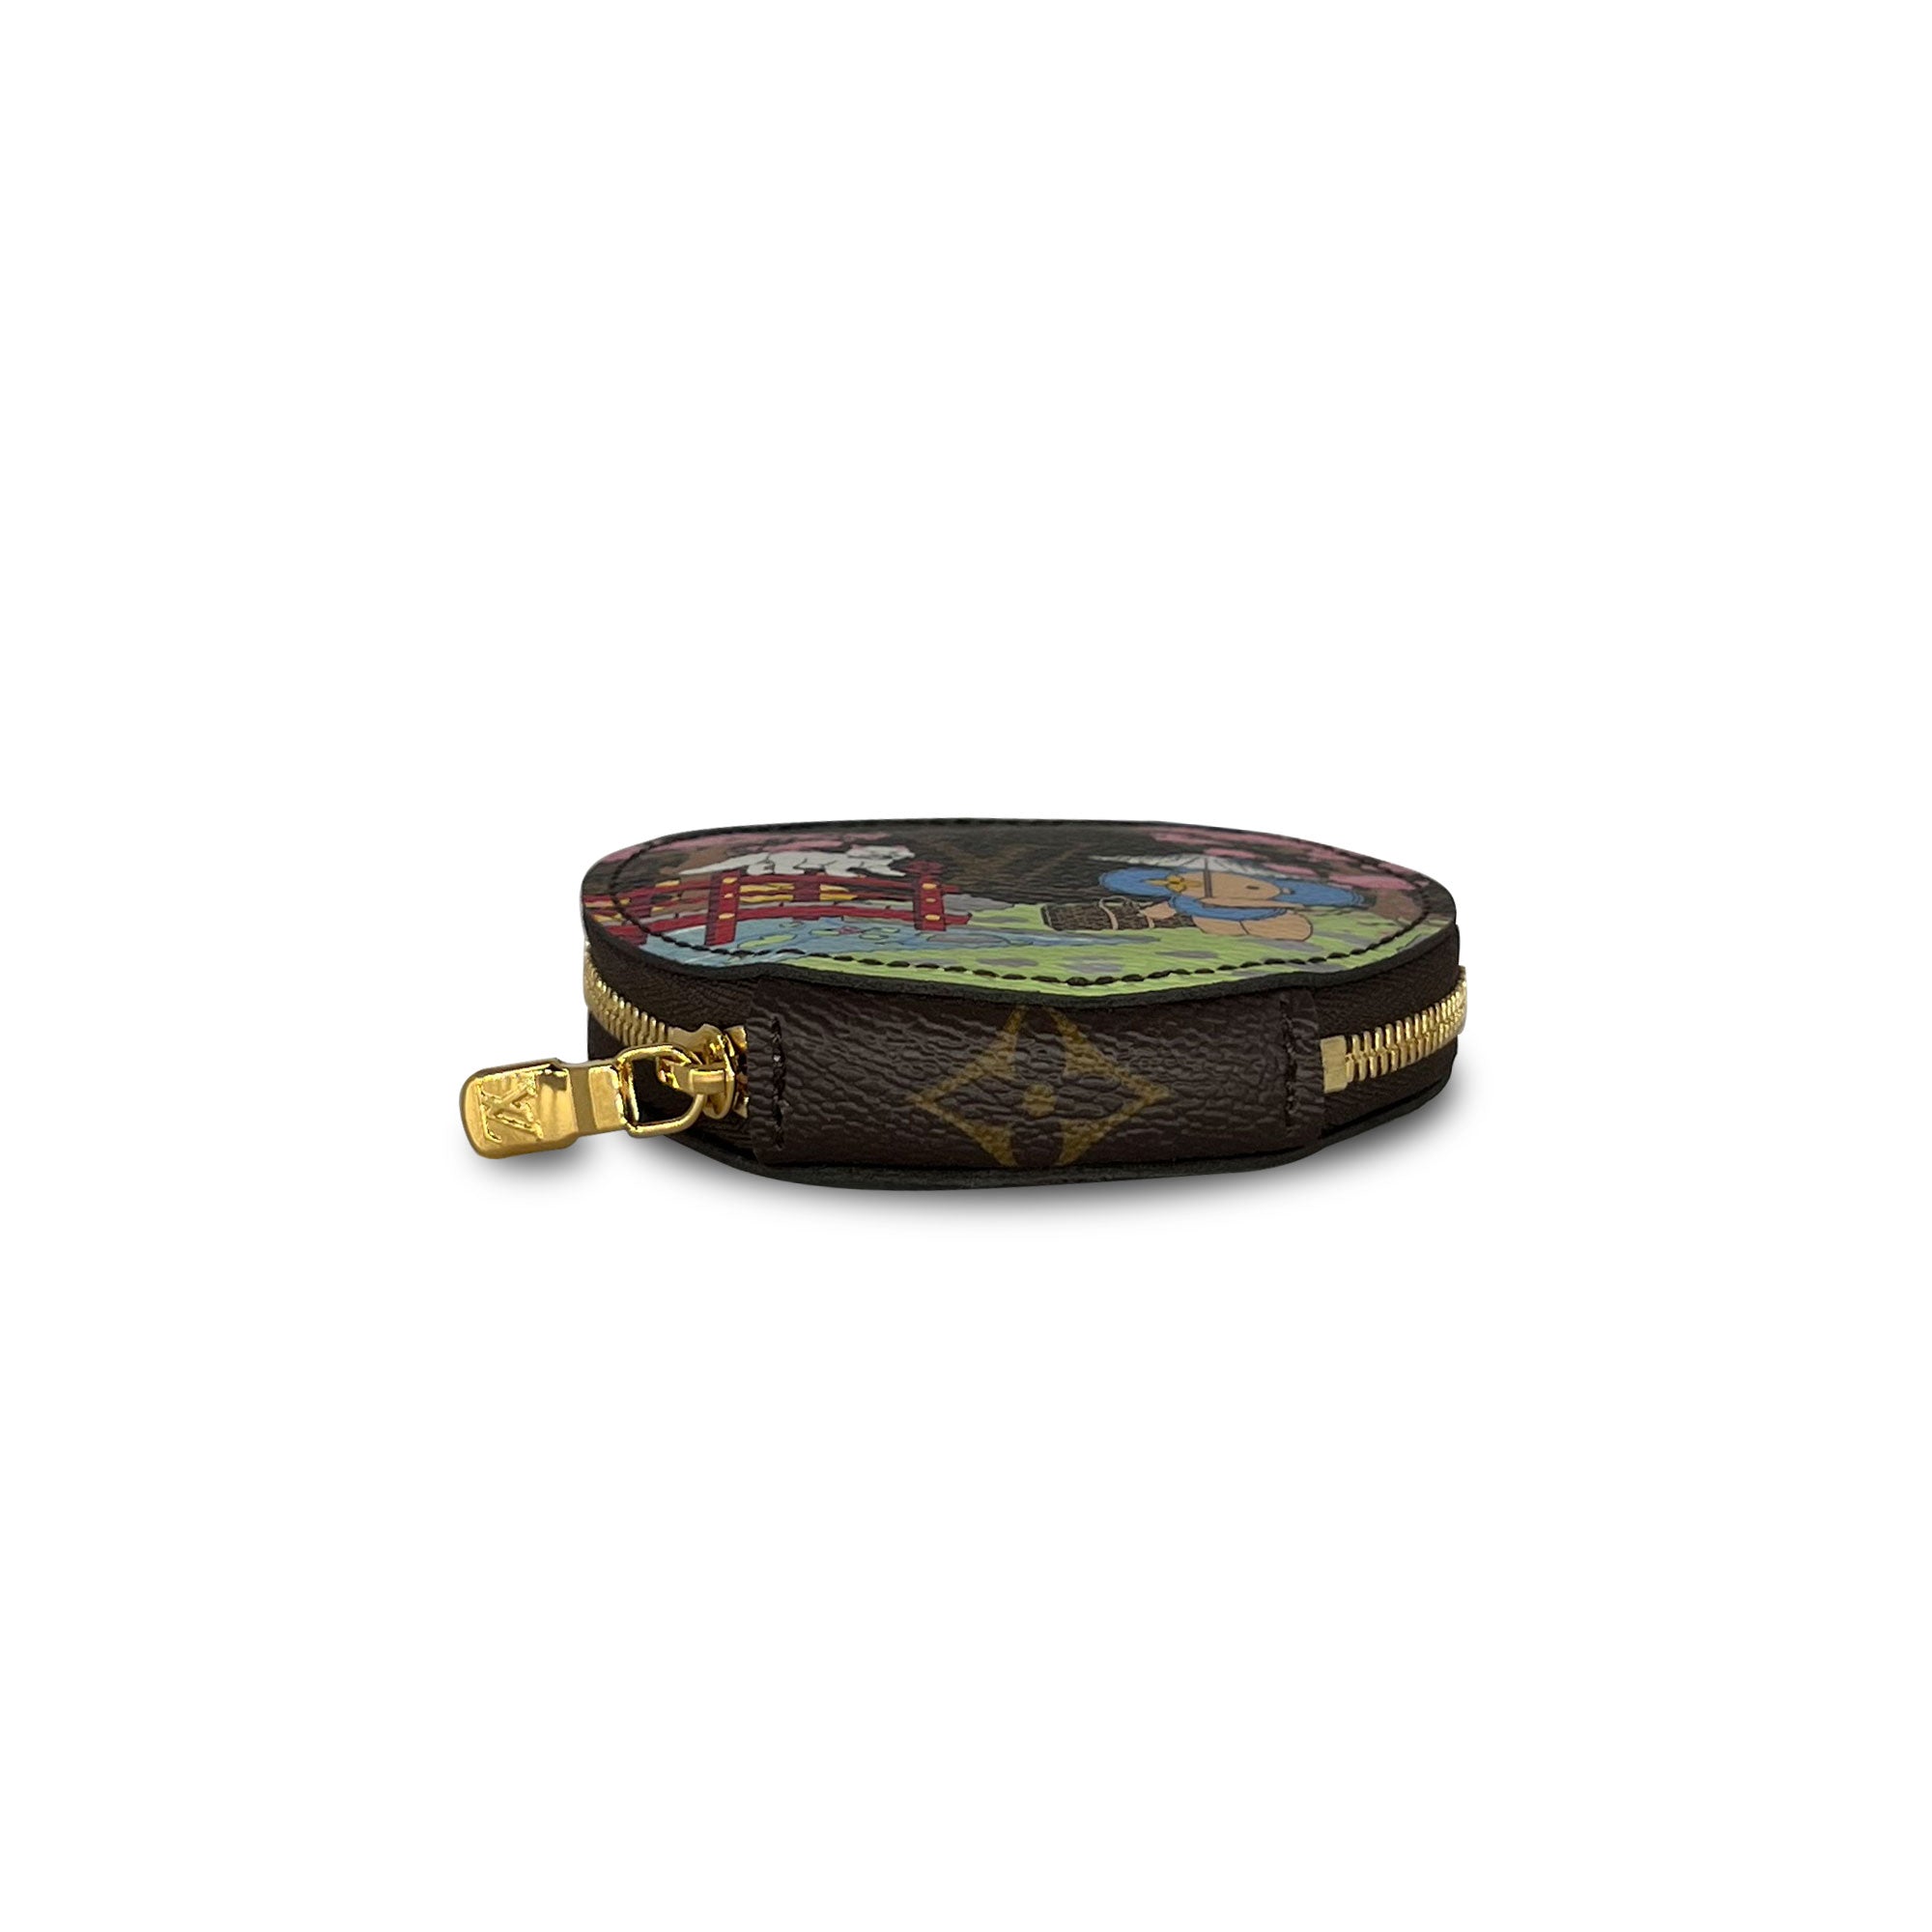 Louis Vuitton limited edition Japan round coin wallet